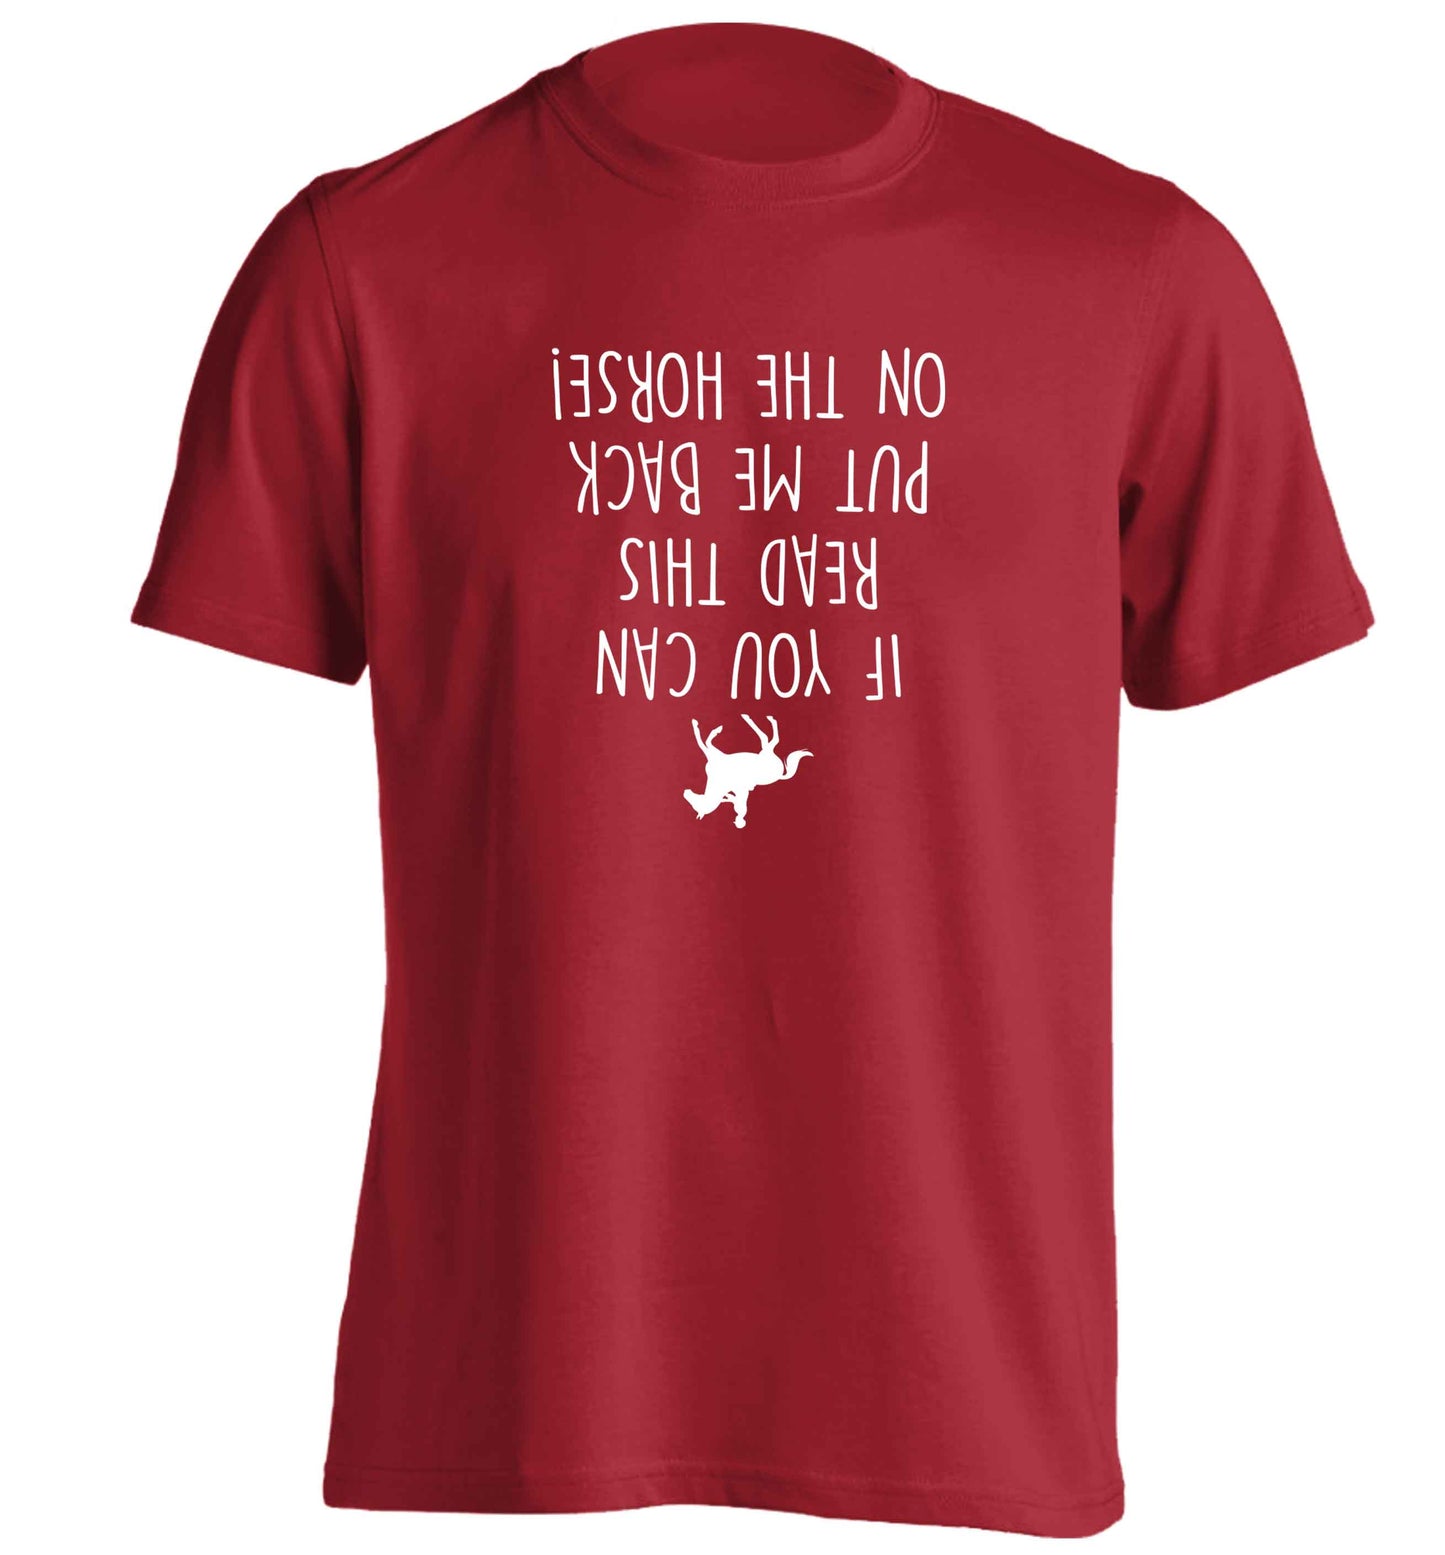 If you can read this put me back on the horse adults unisex red Tshirt 2XL